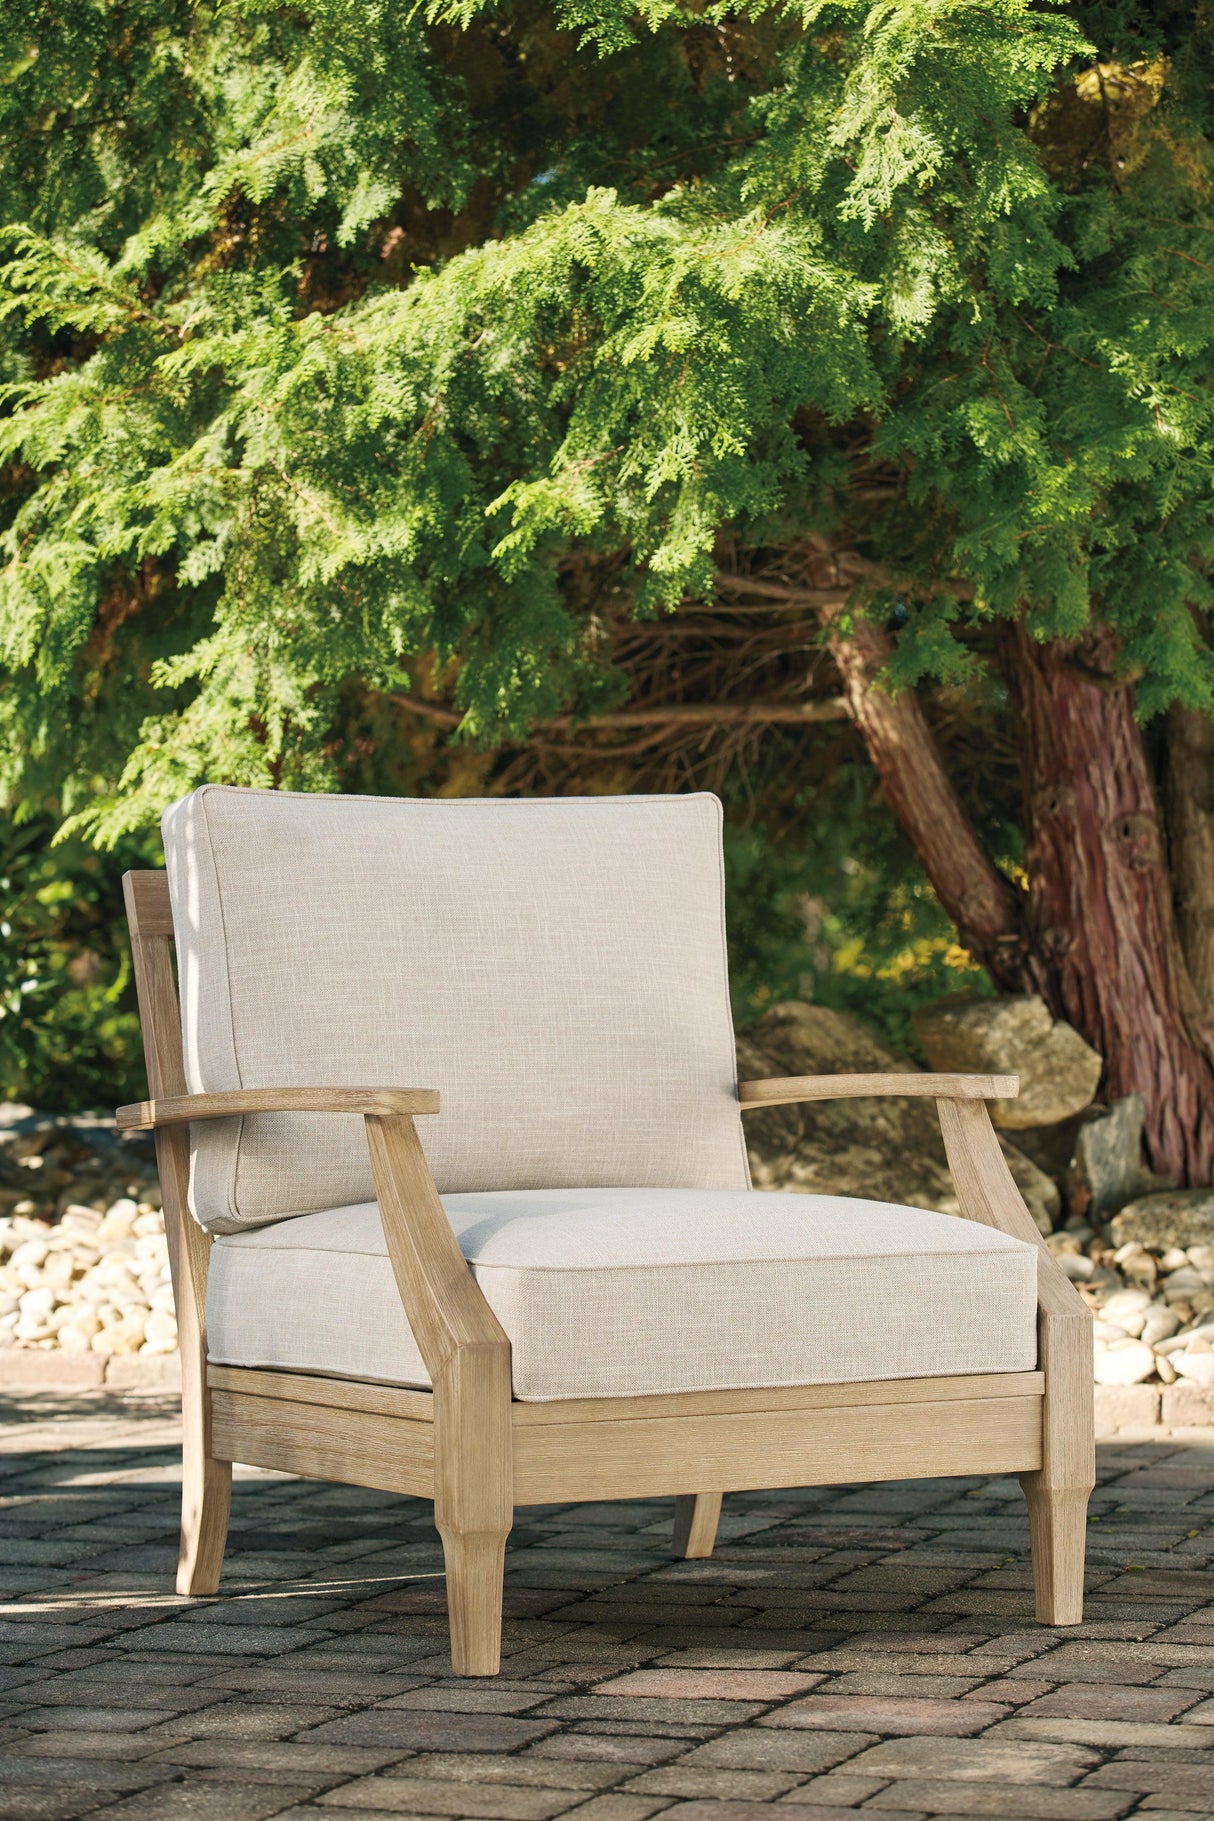 Clare Beige View 2 Outdoor Lounge Chairs With 2 End Tables - Ella Furniture